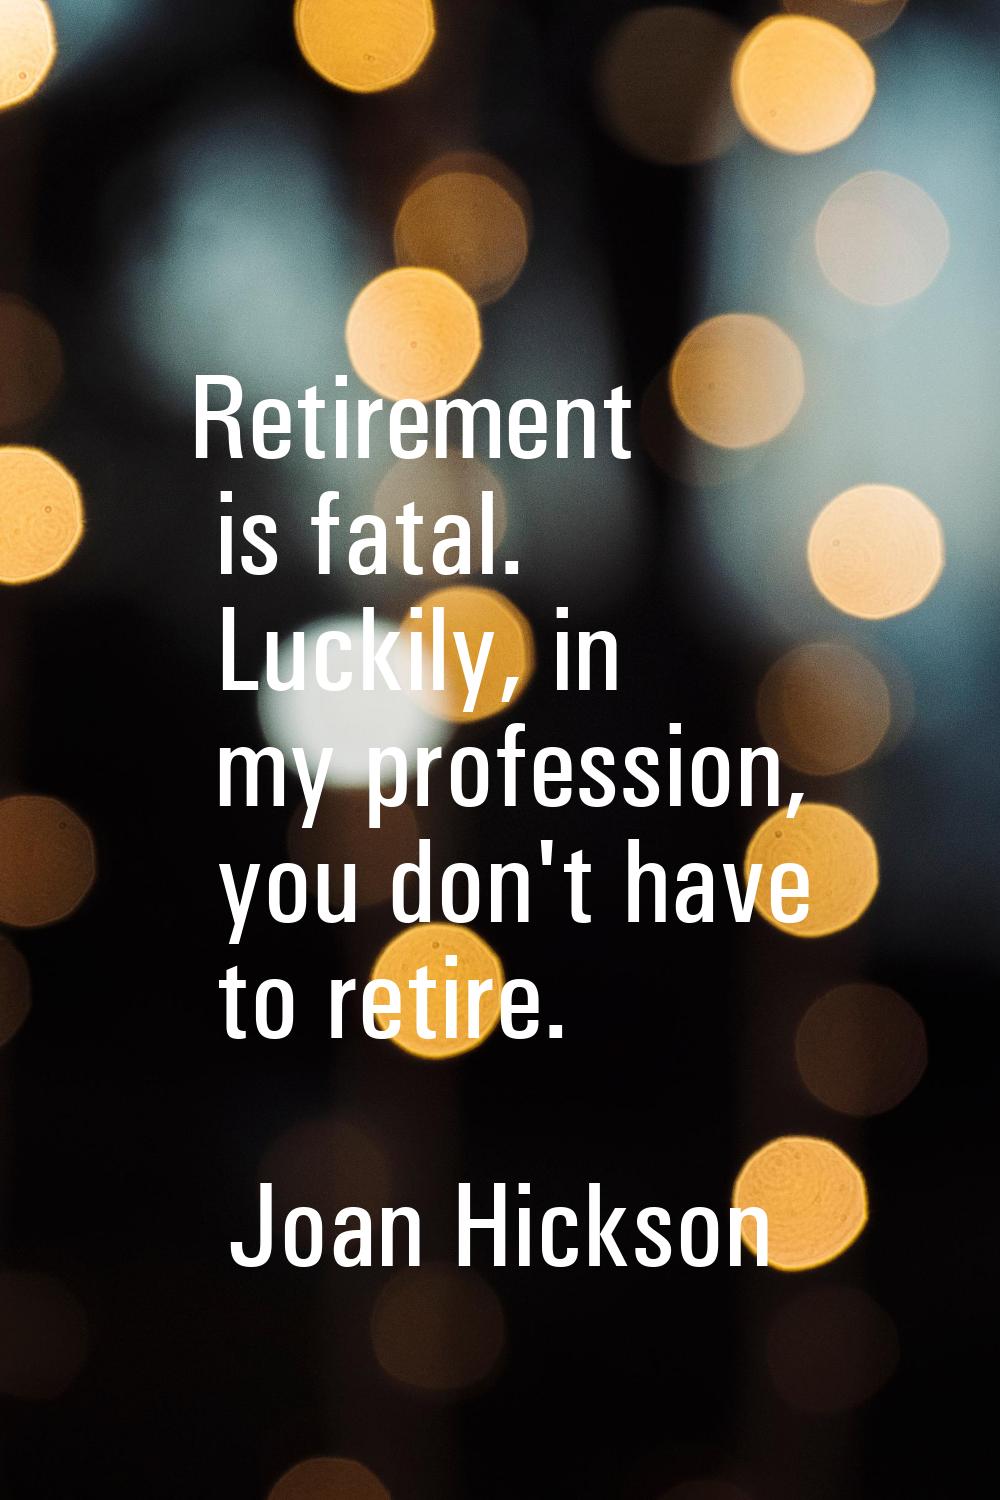 Retirement is fatal. Luckily, in my profession, you don't have to retire.